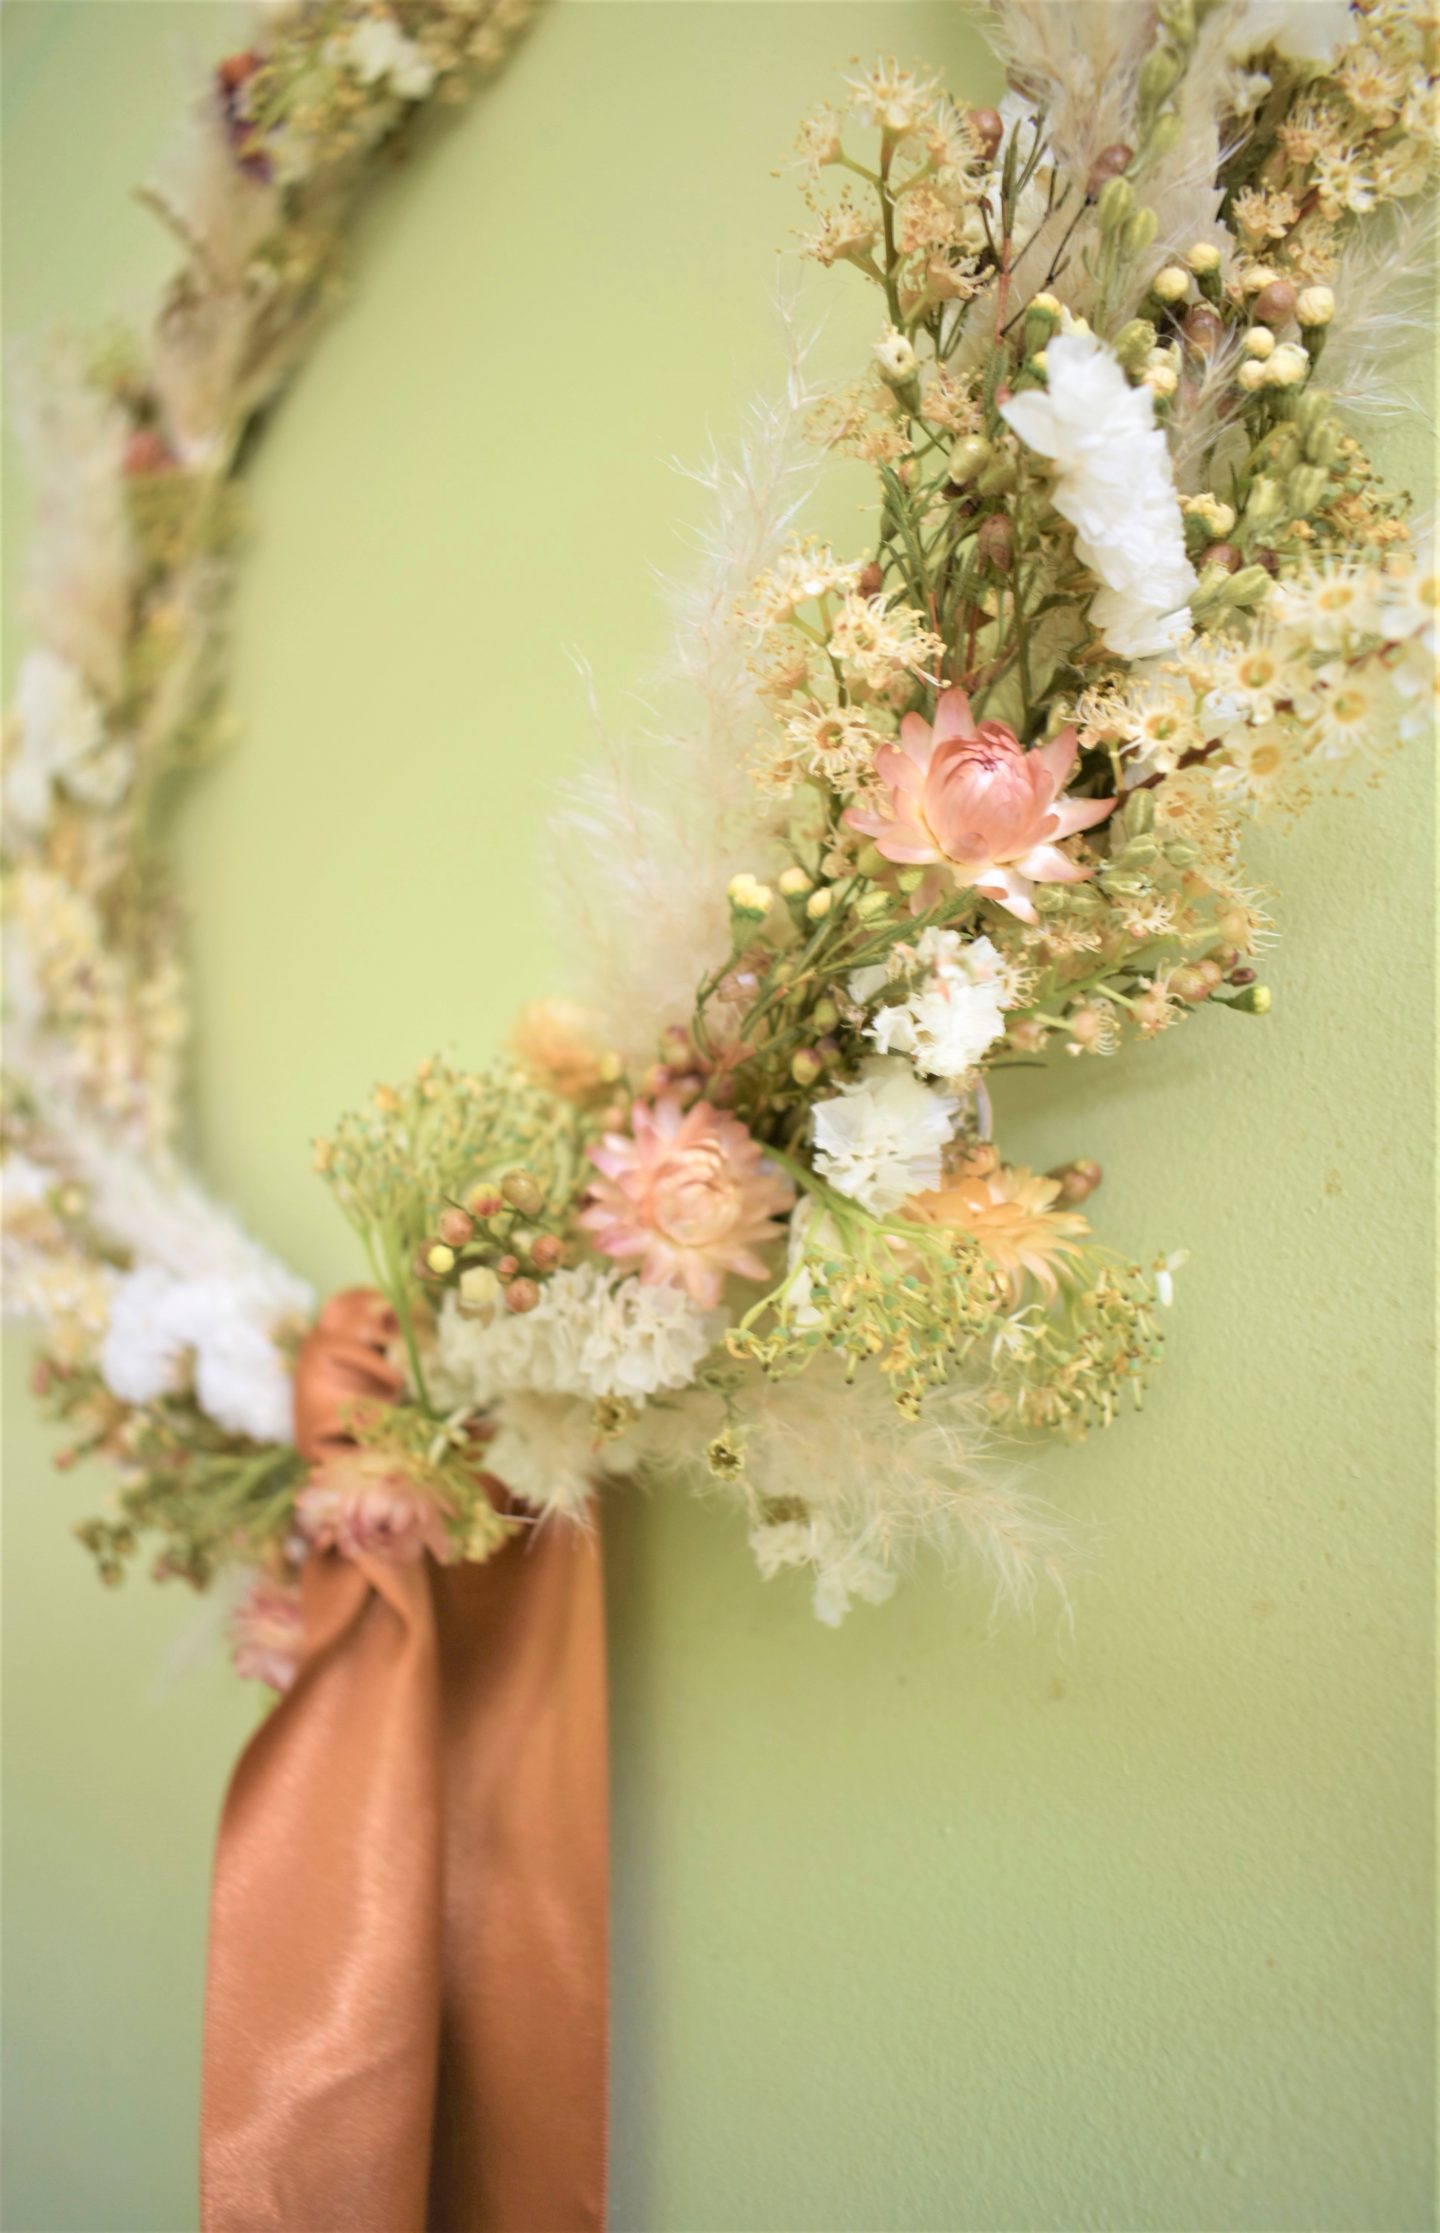 How to Use Silica to Dry Your Wedding Bouquet